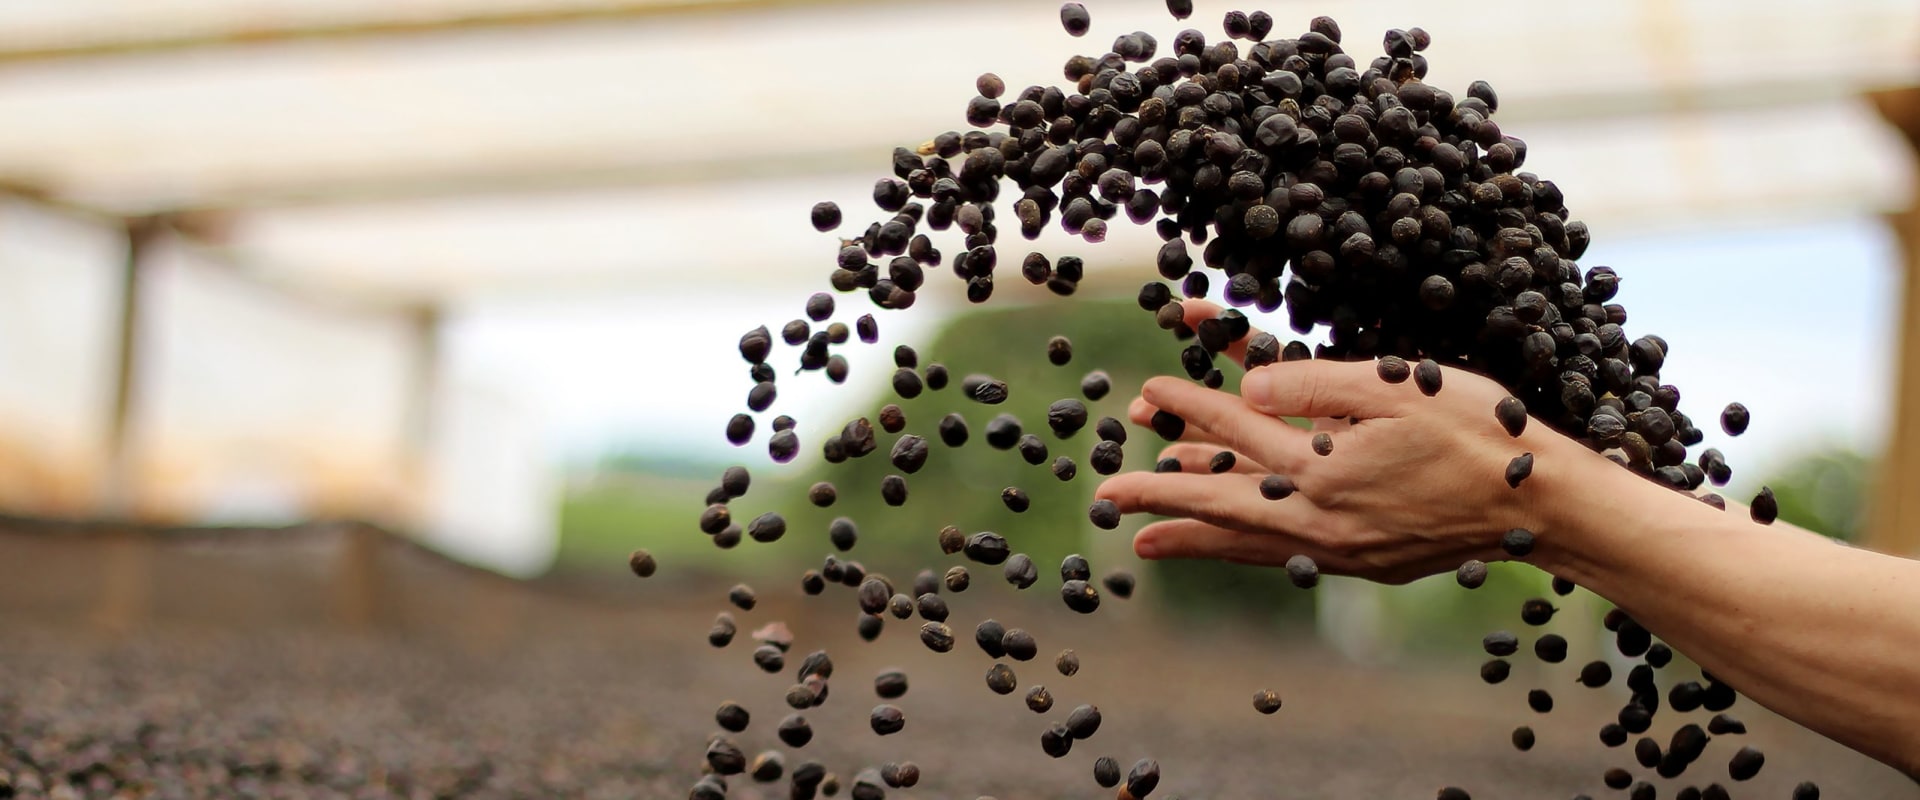 What does coffee sustainability mean?